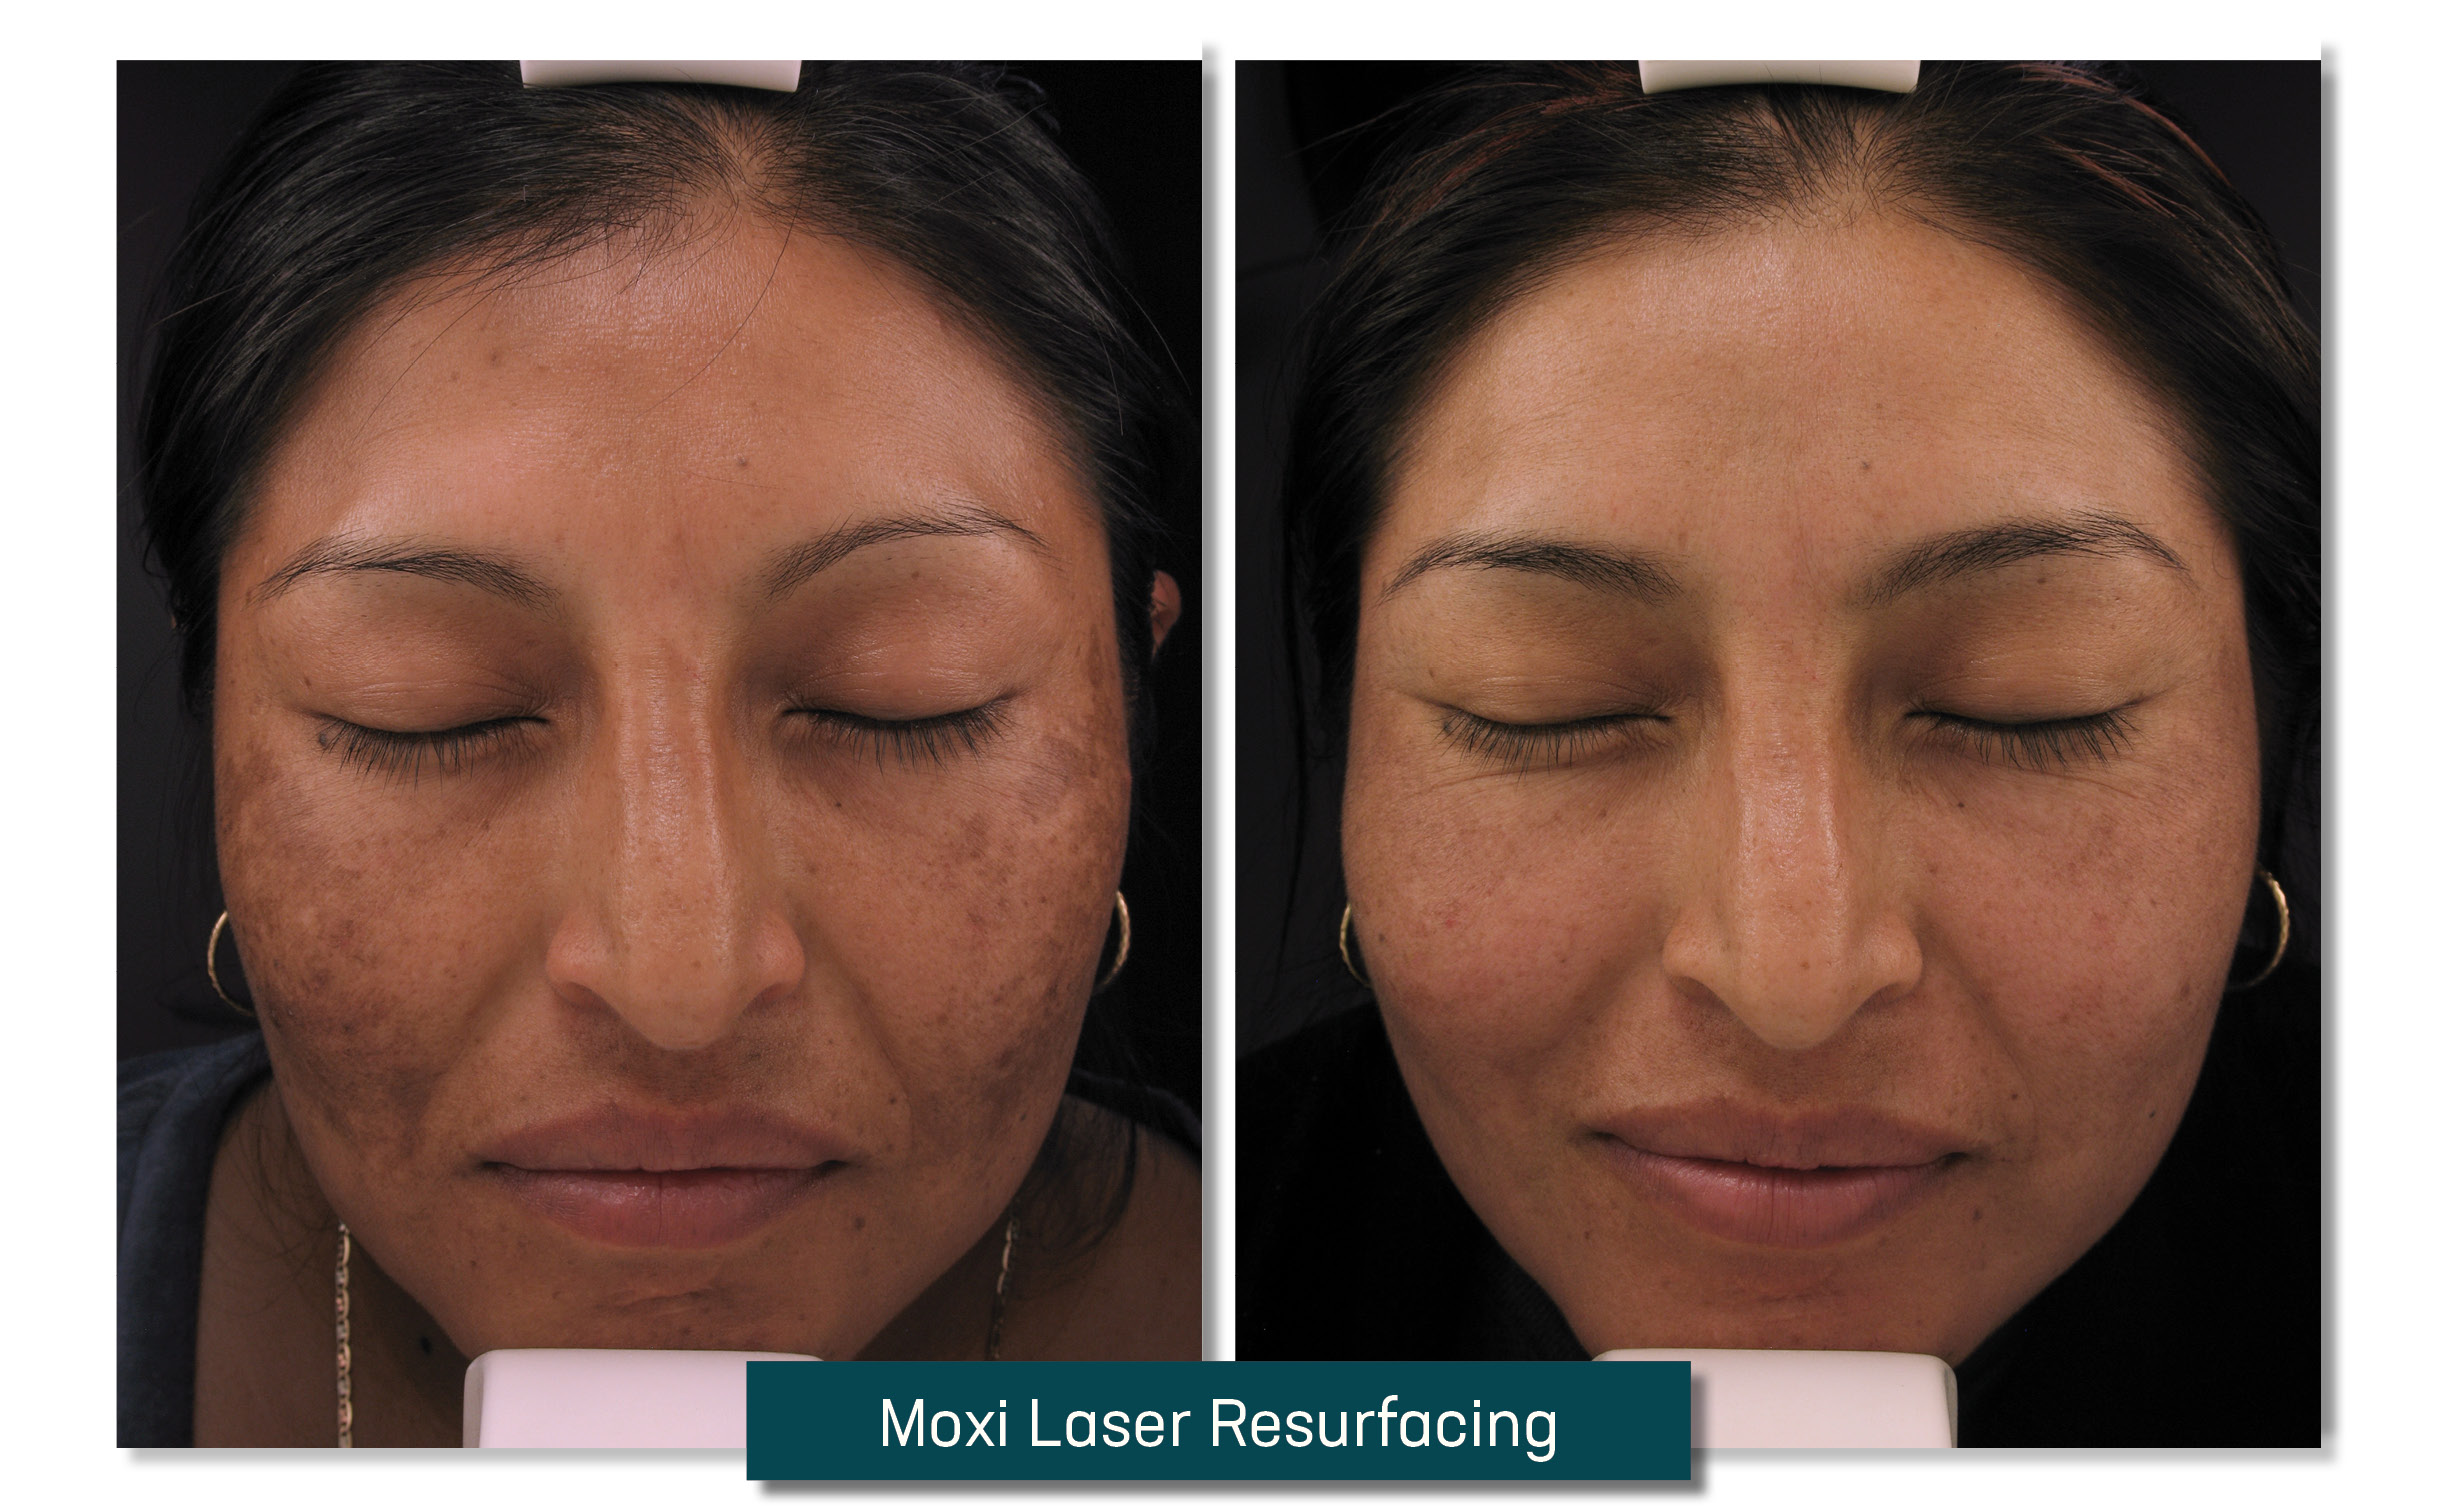 laser resurfacing - before and after